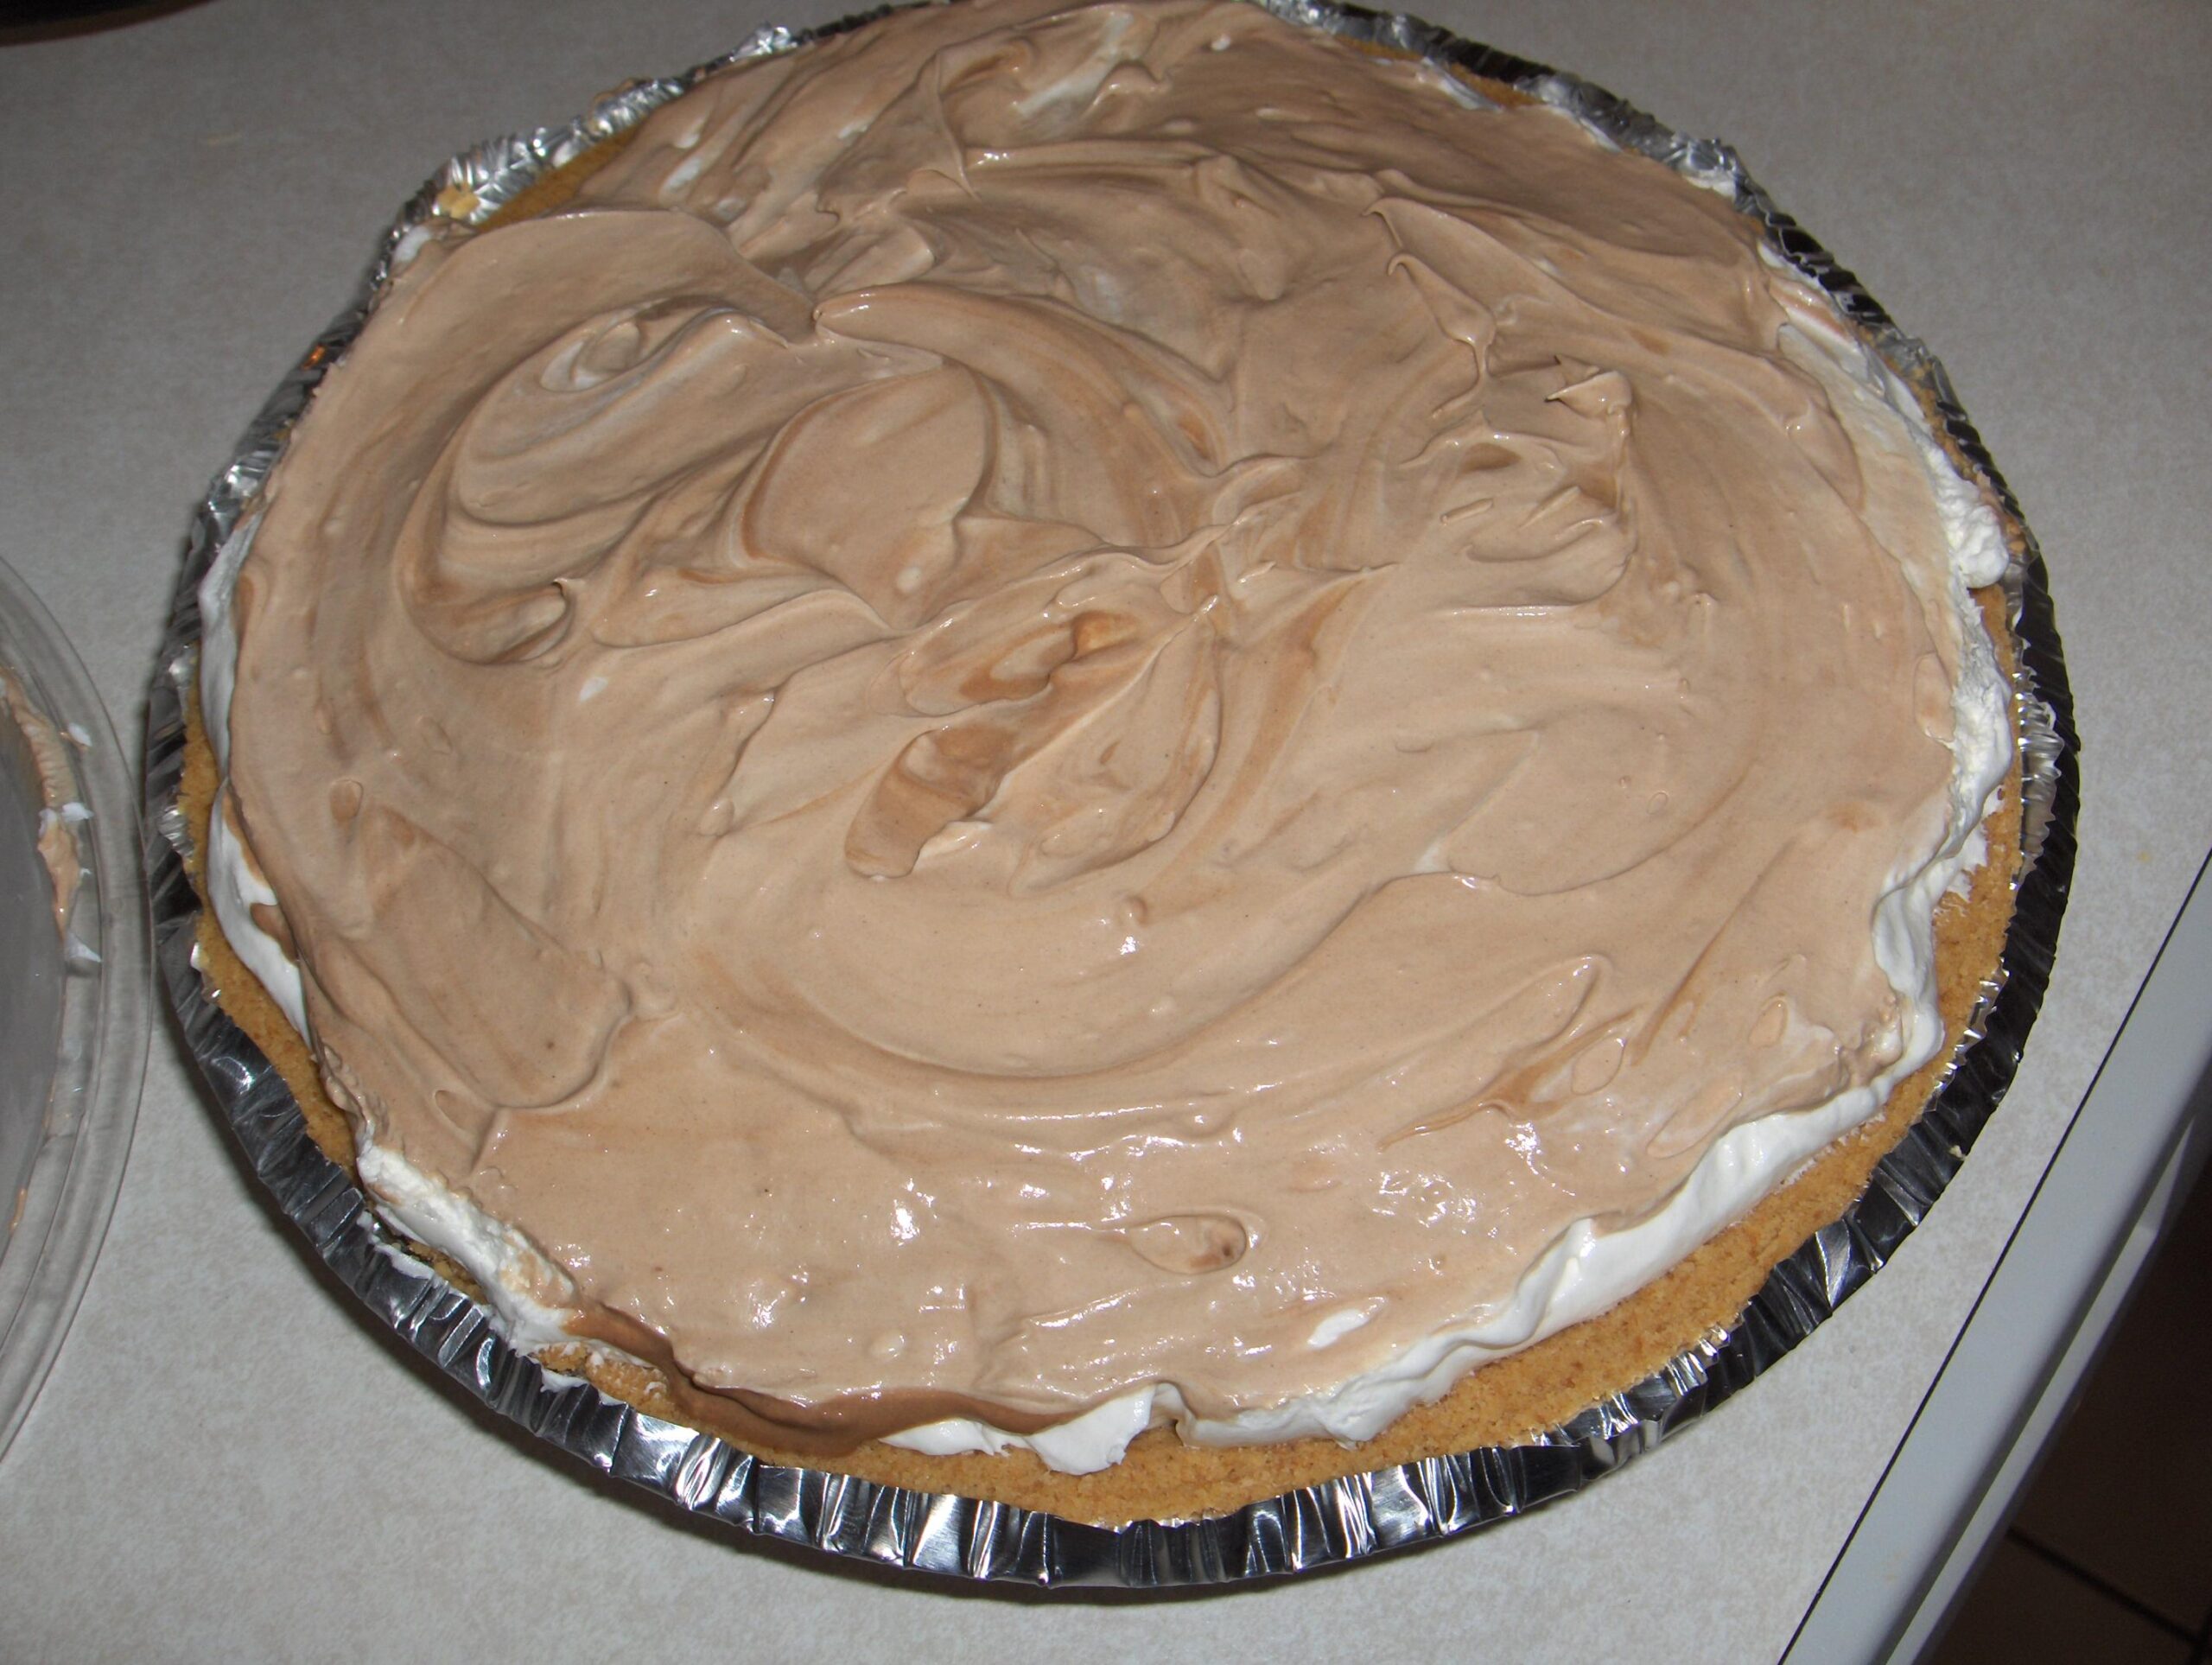 Delectable Swiss Mocha Cheesecake Recipe for Dessert Lovers